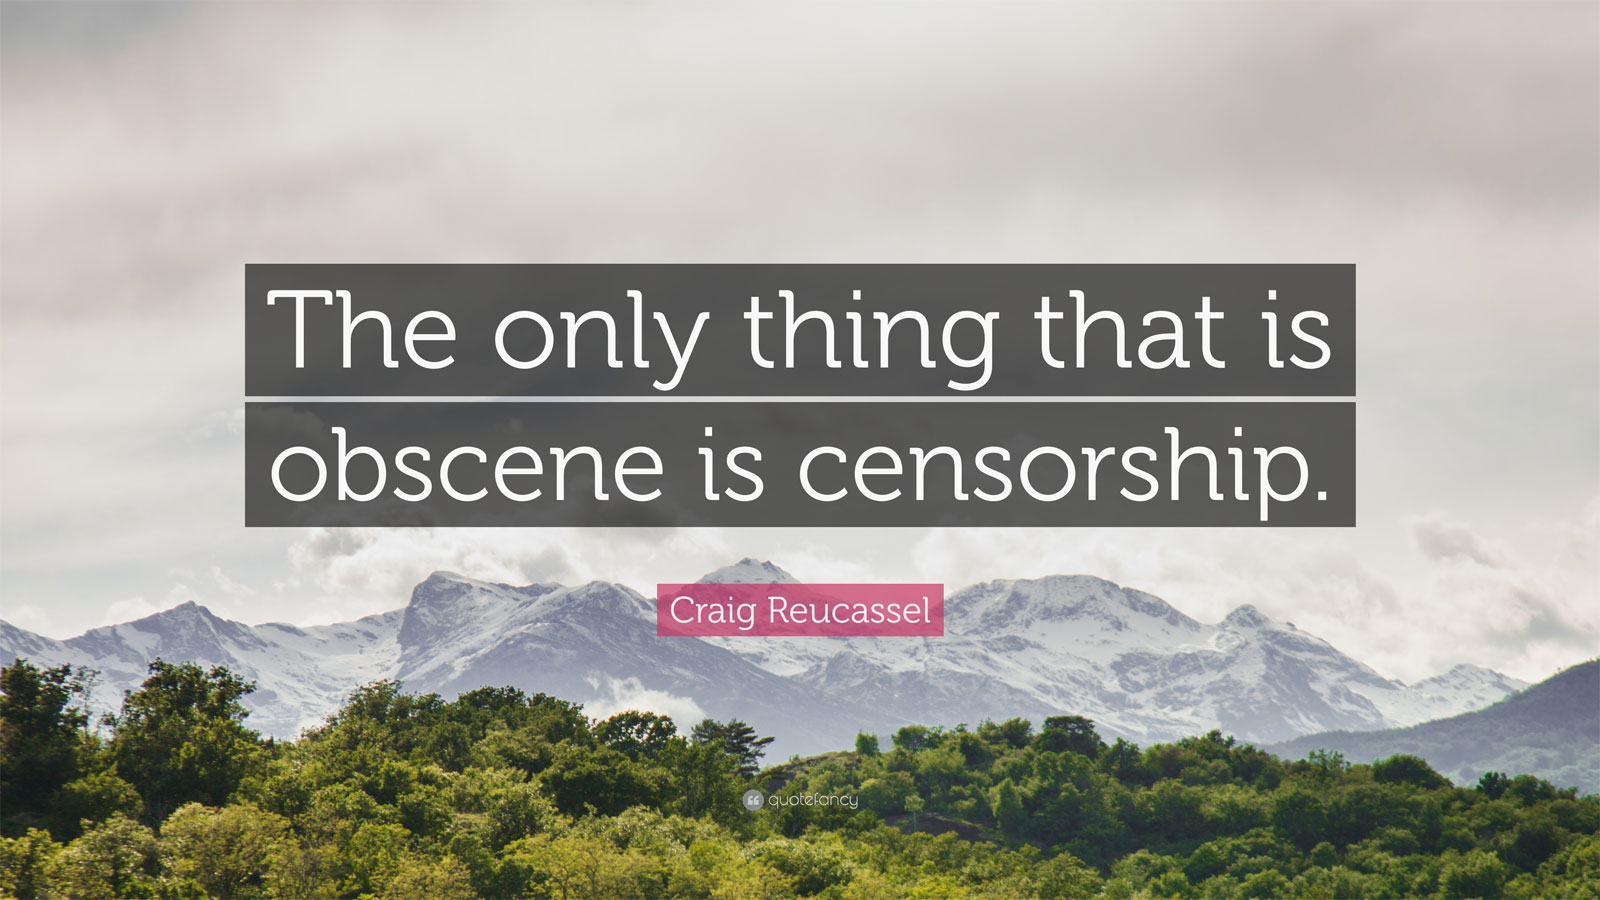 censorship 115 Best Motivational Wallpaper Examples with Inspiring Quotes